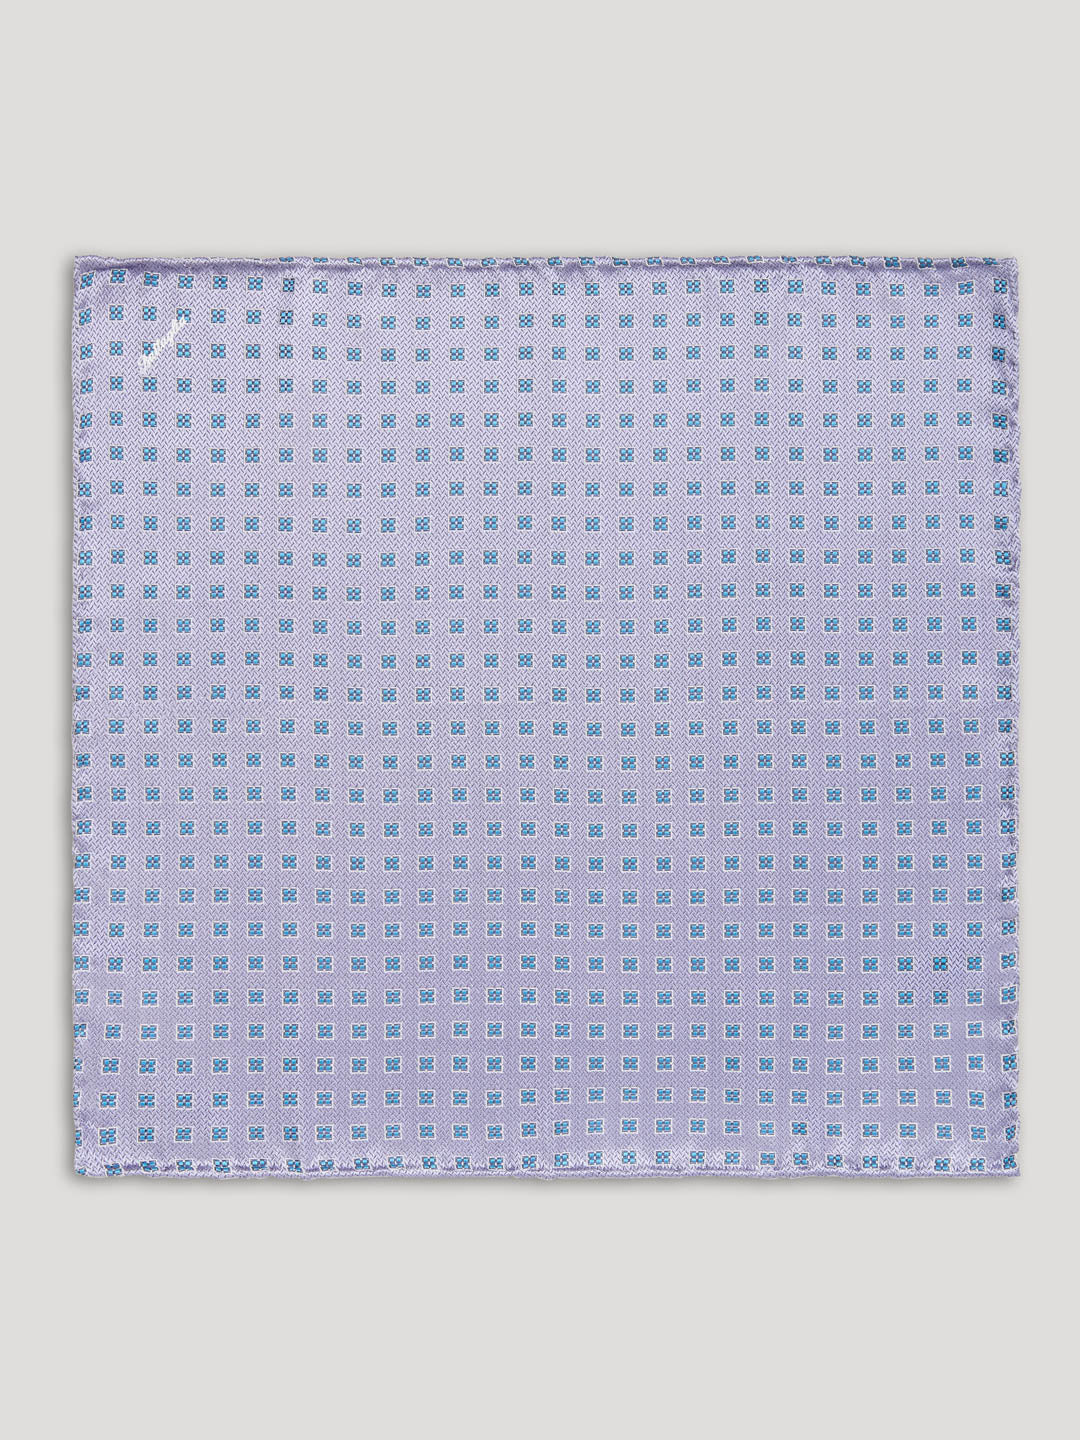 Purple and blue handkerchief with large pattern